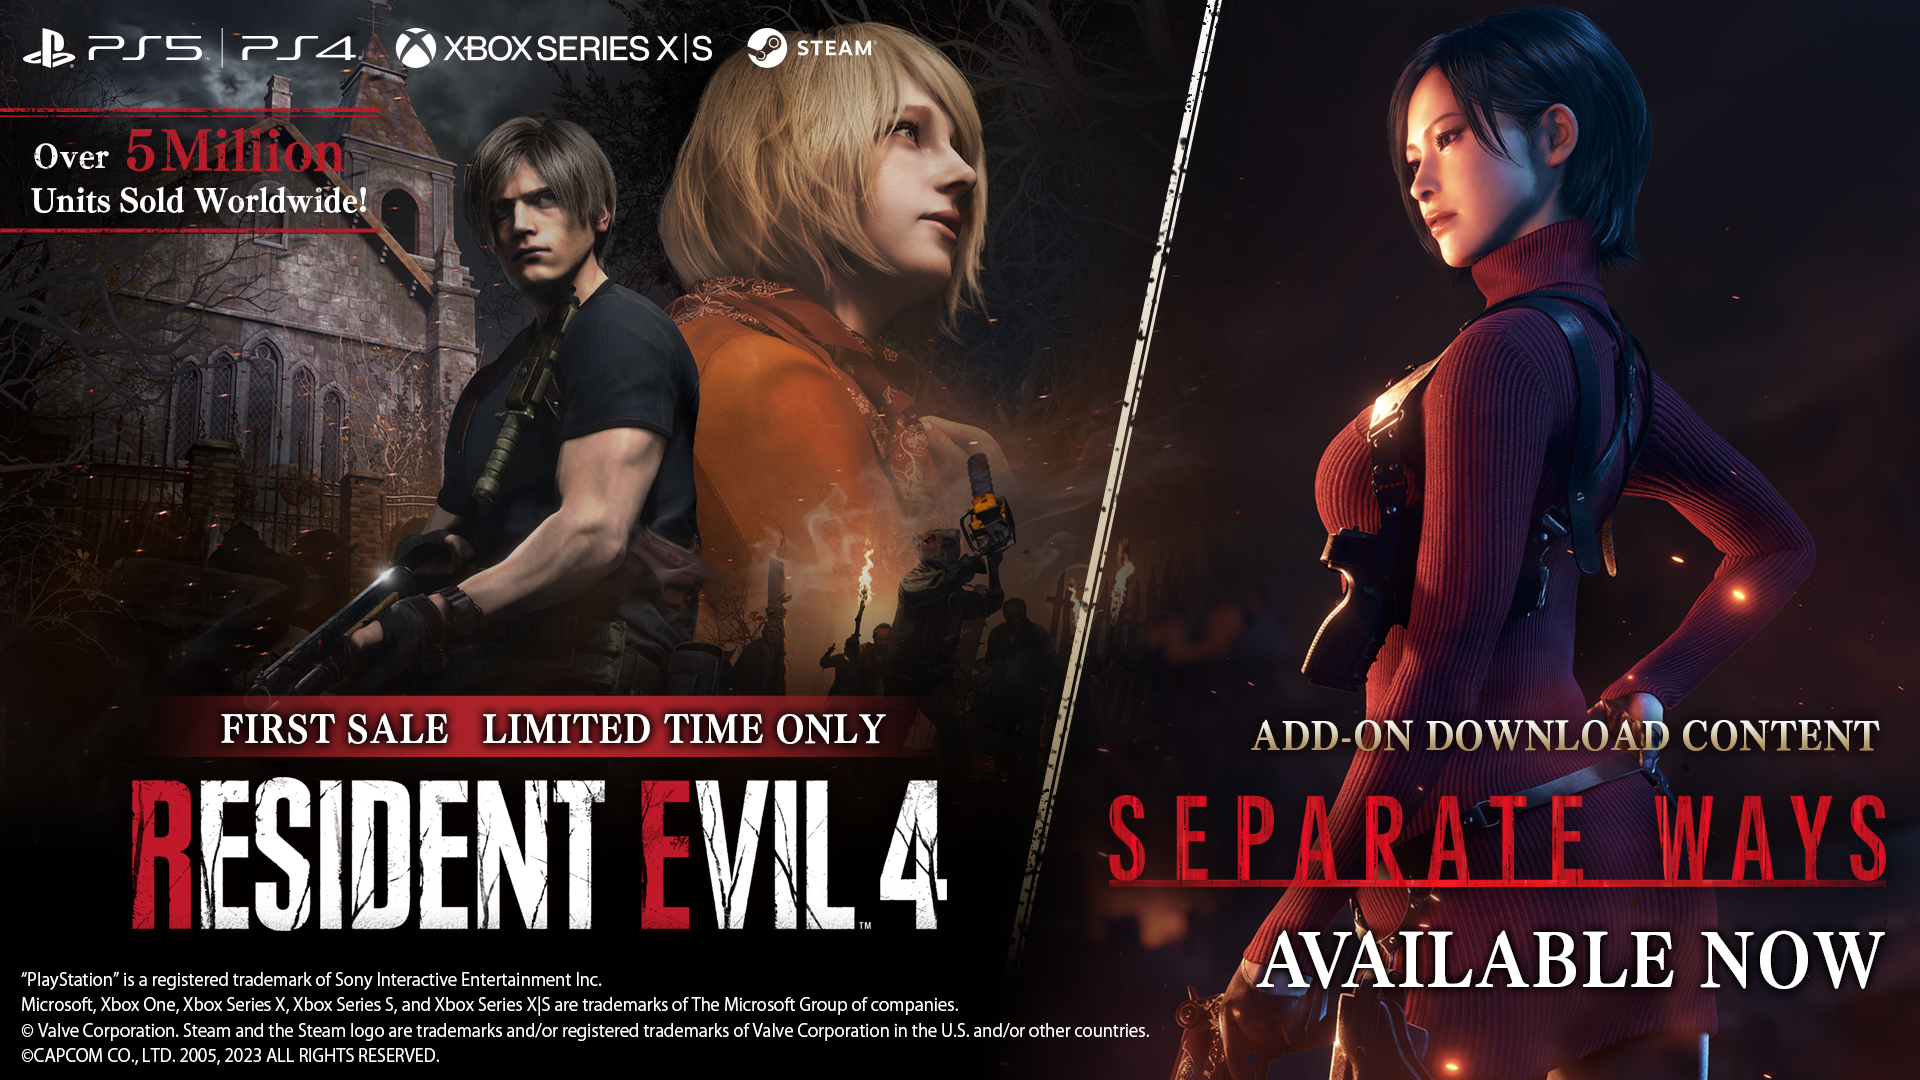 DLC Evil RYT9 exhilarating Additional offers out | story new for 4 Resident now,